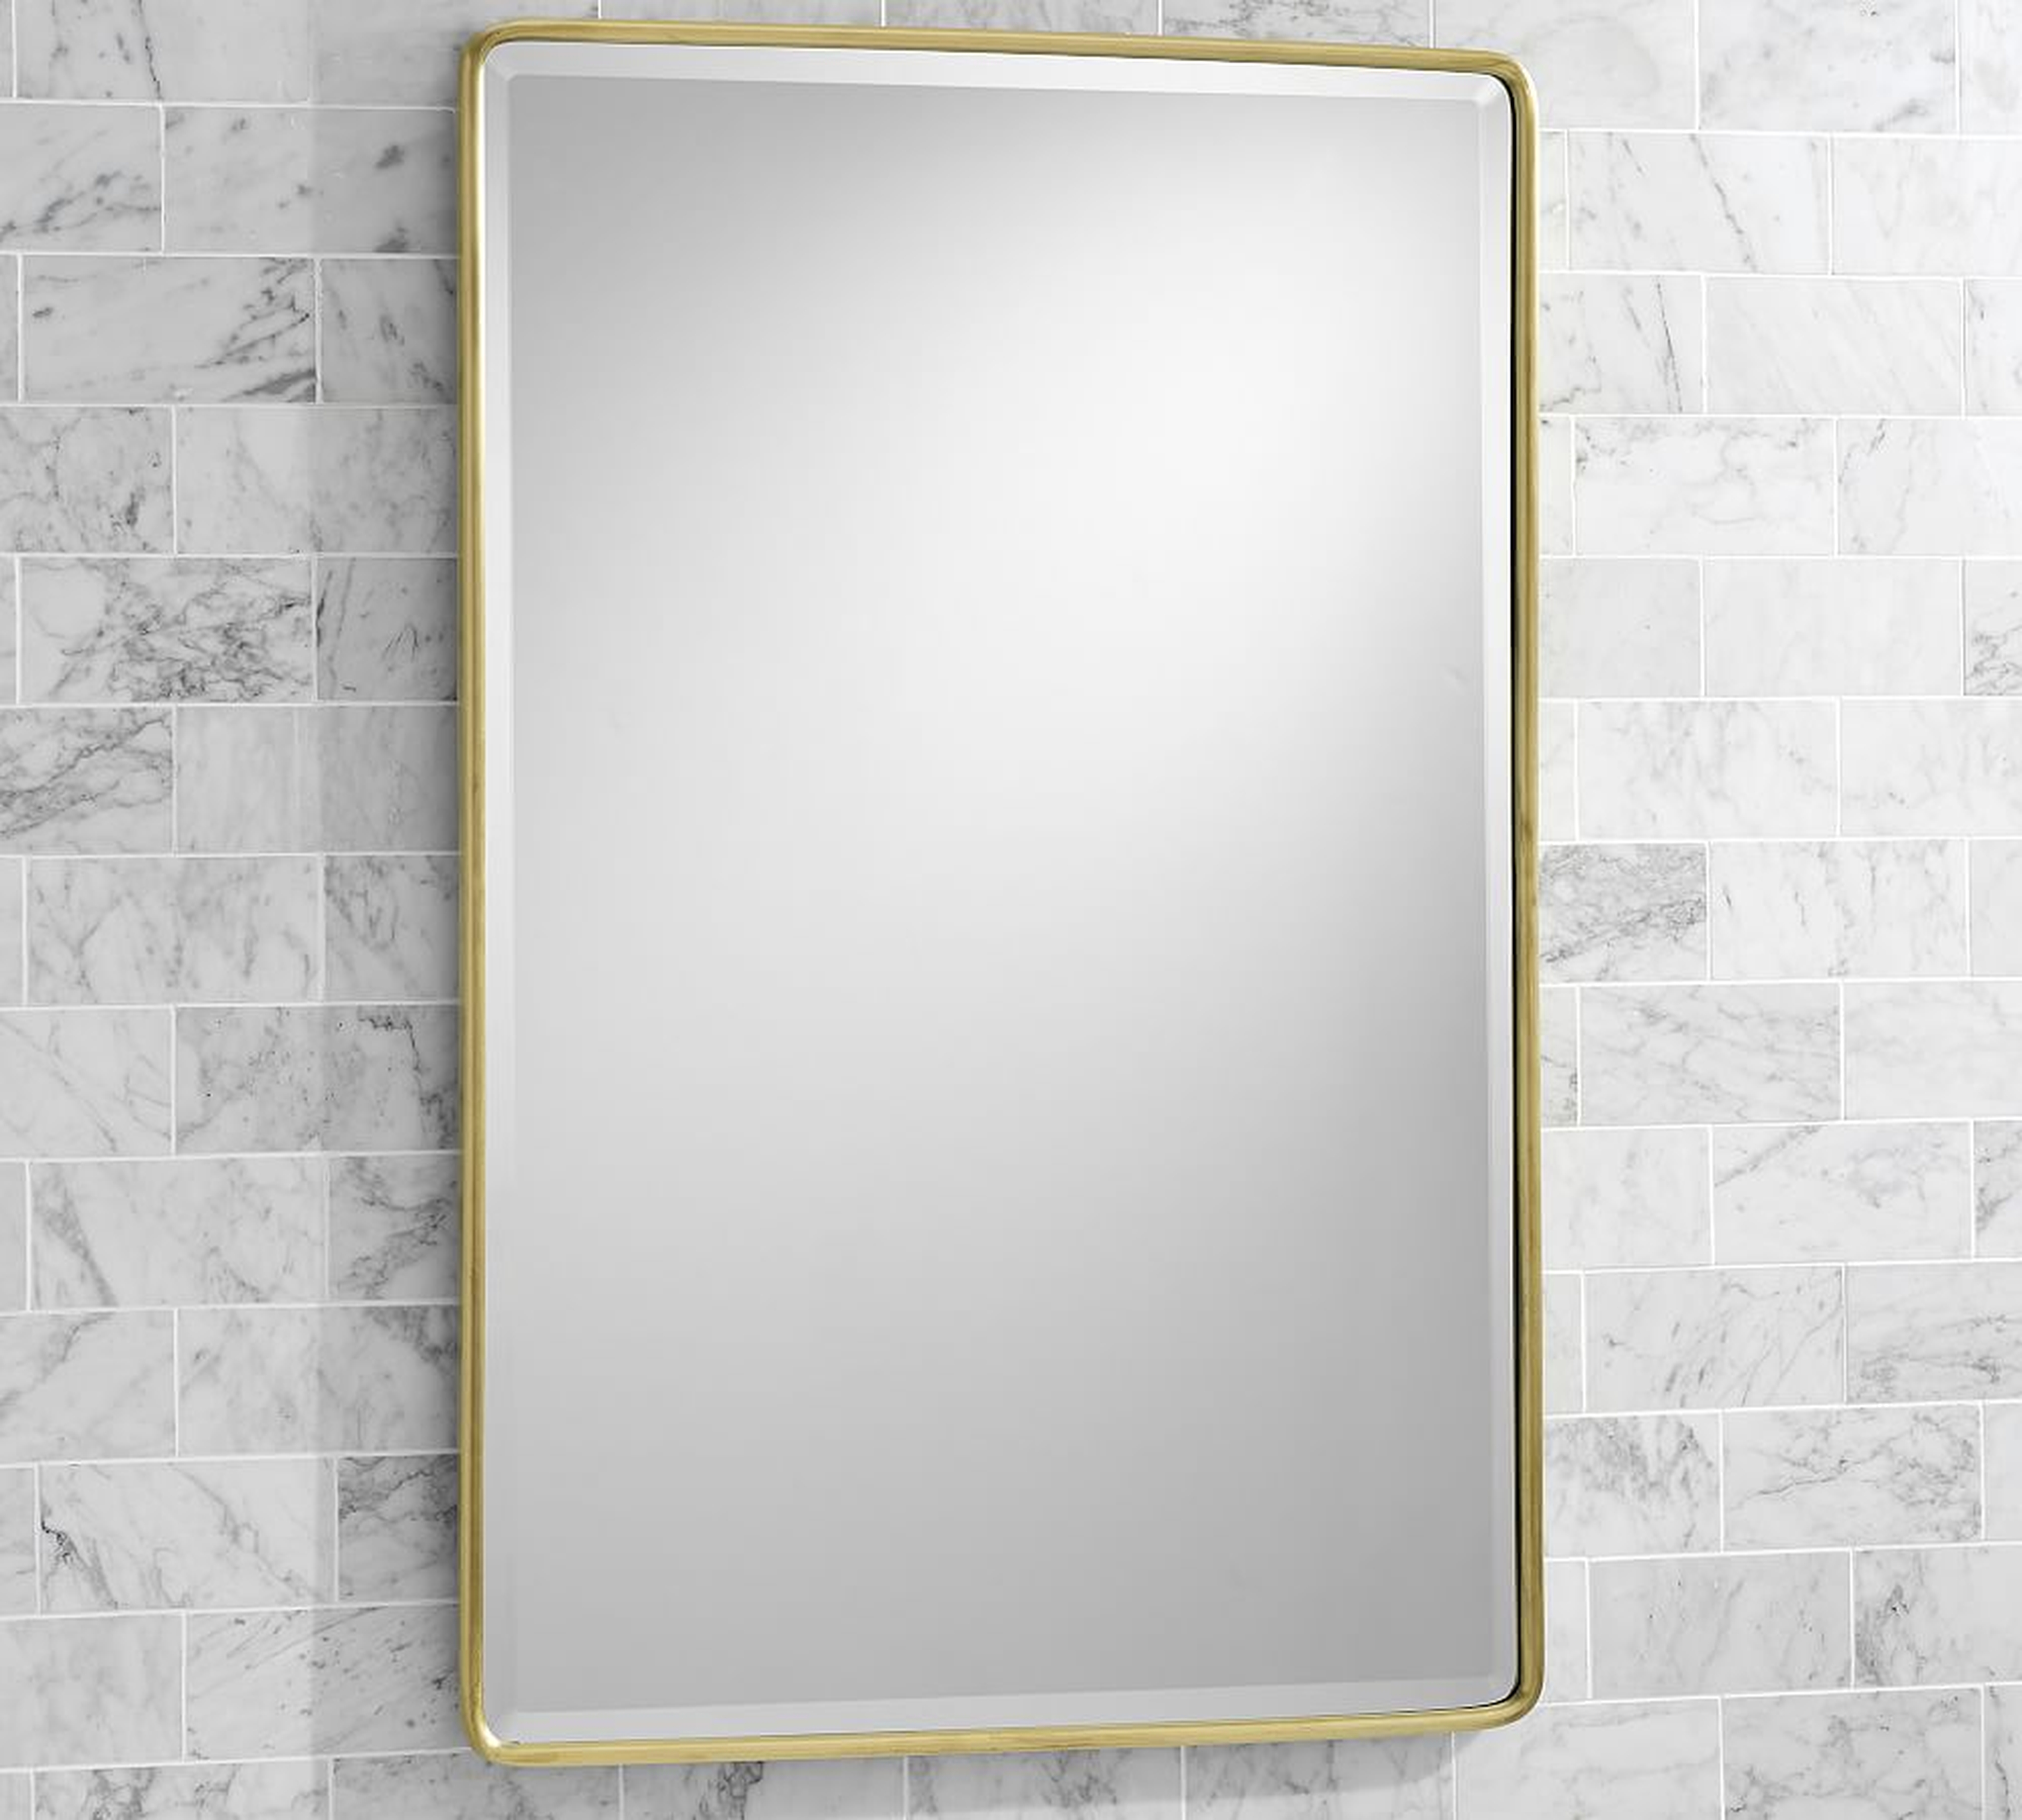 Brass Vintage Rounded Rectangular Mirror, 23x35" with French Cleat Mount - Pottery Barn